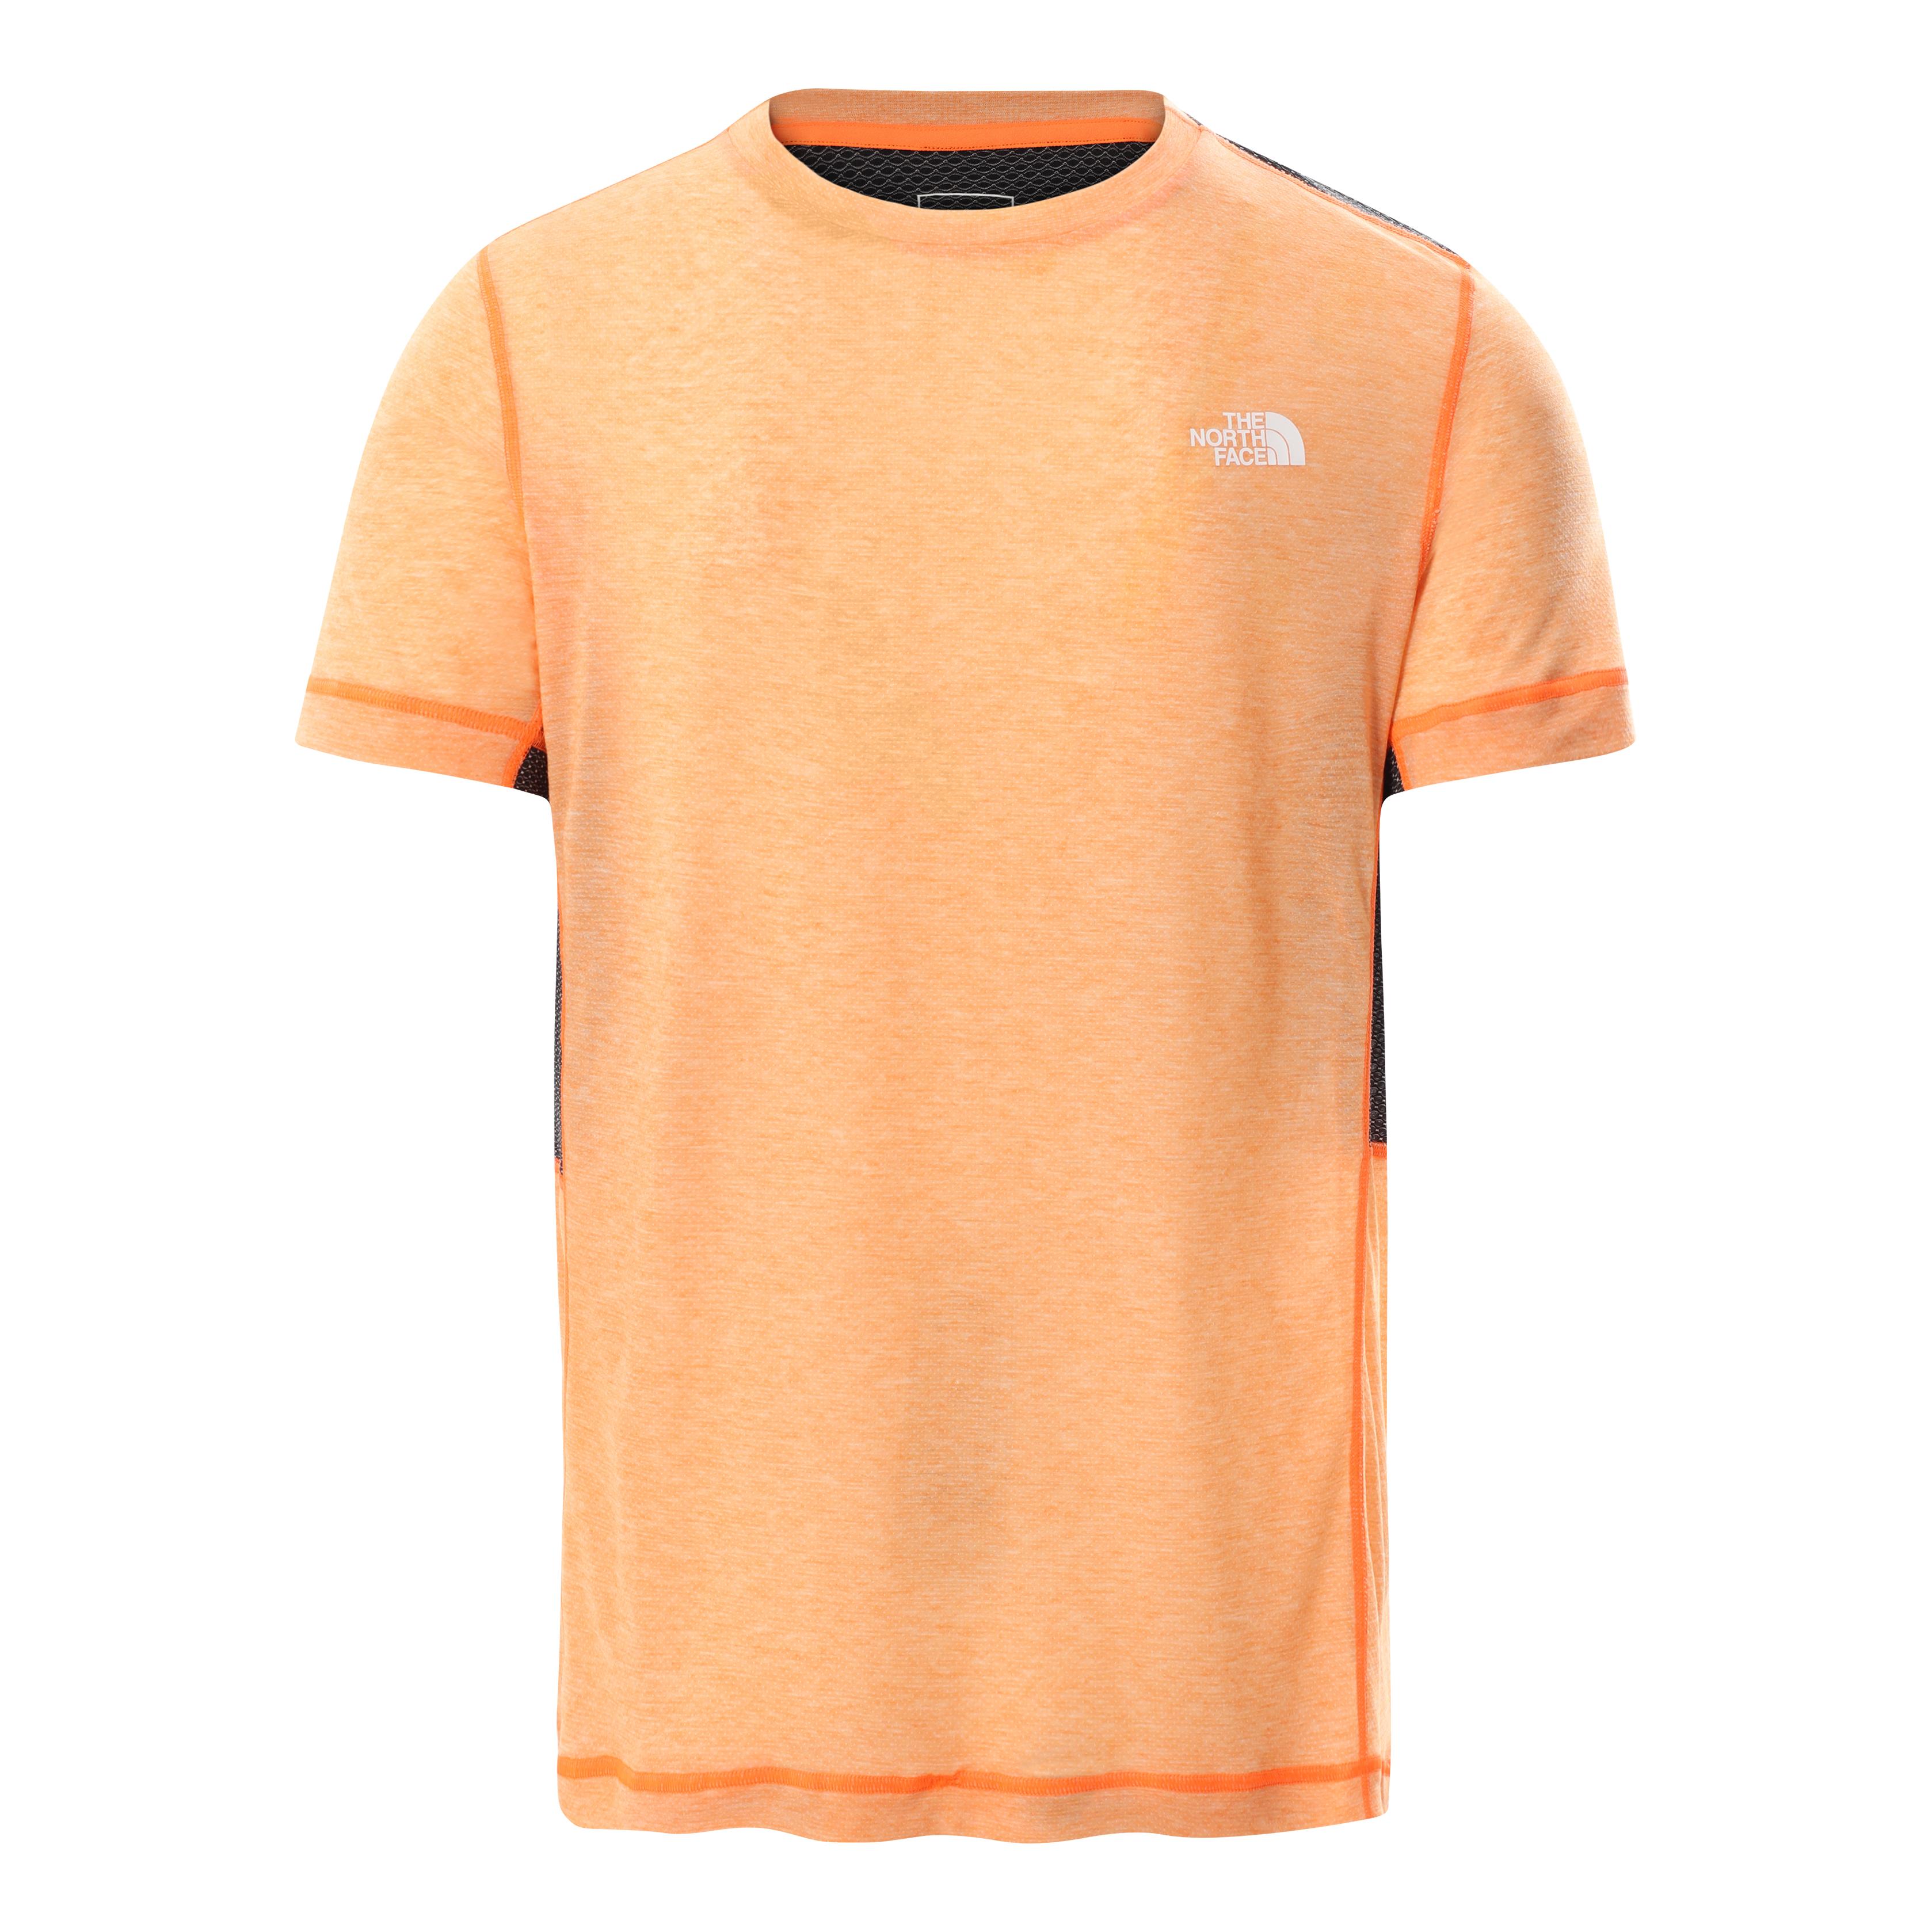 The North Face Circadian Short Sleeves Tee Abricot S 